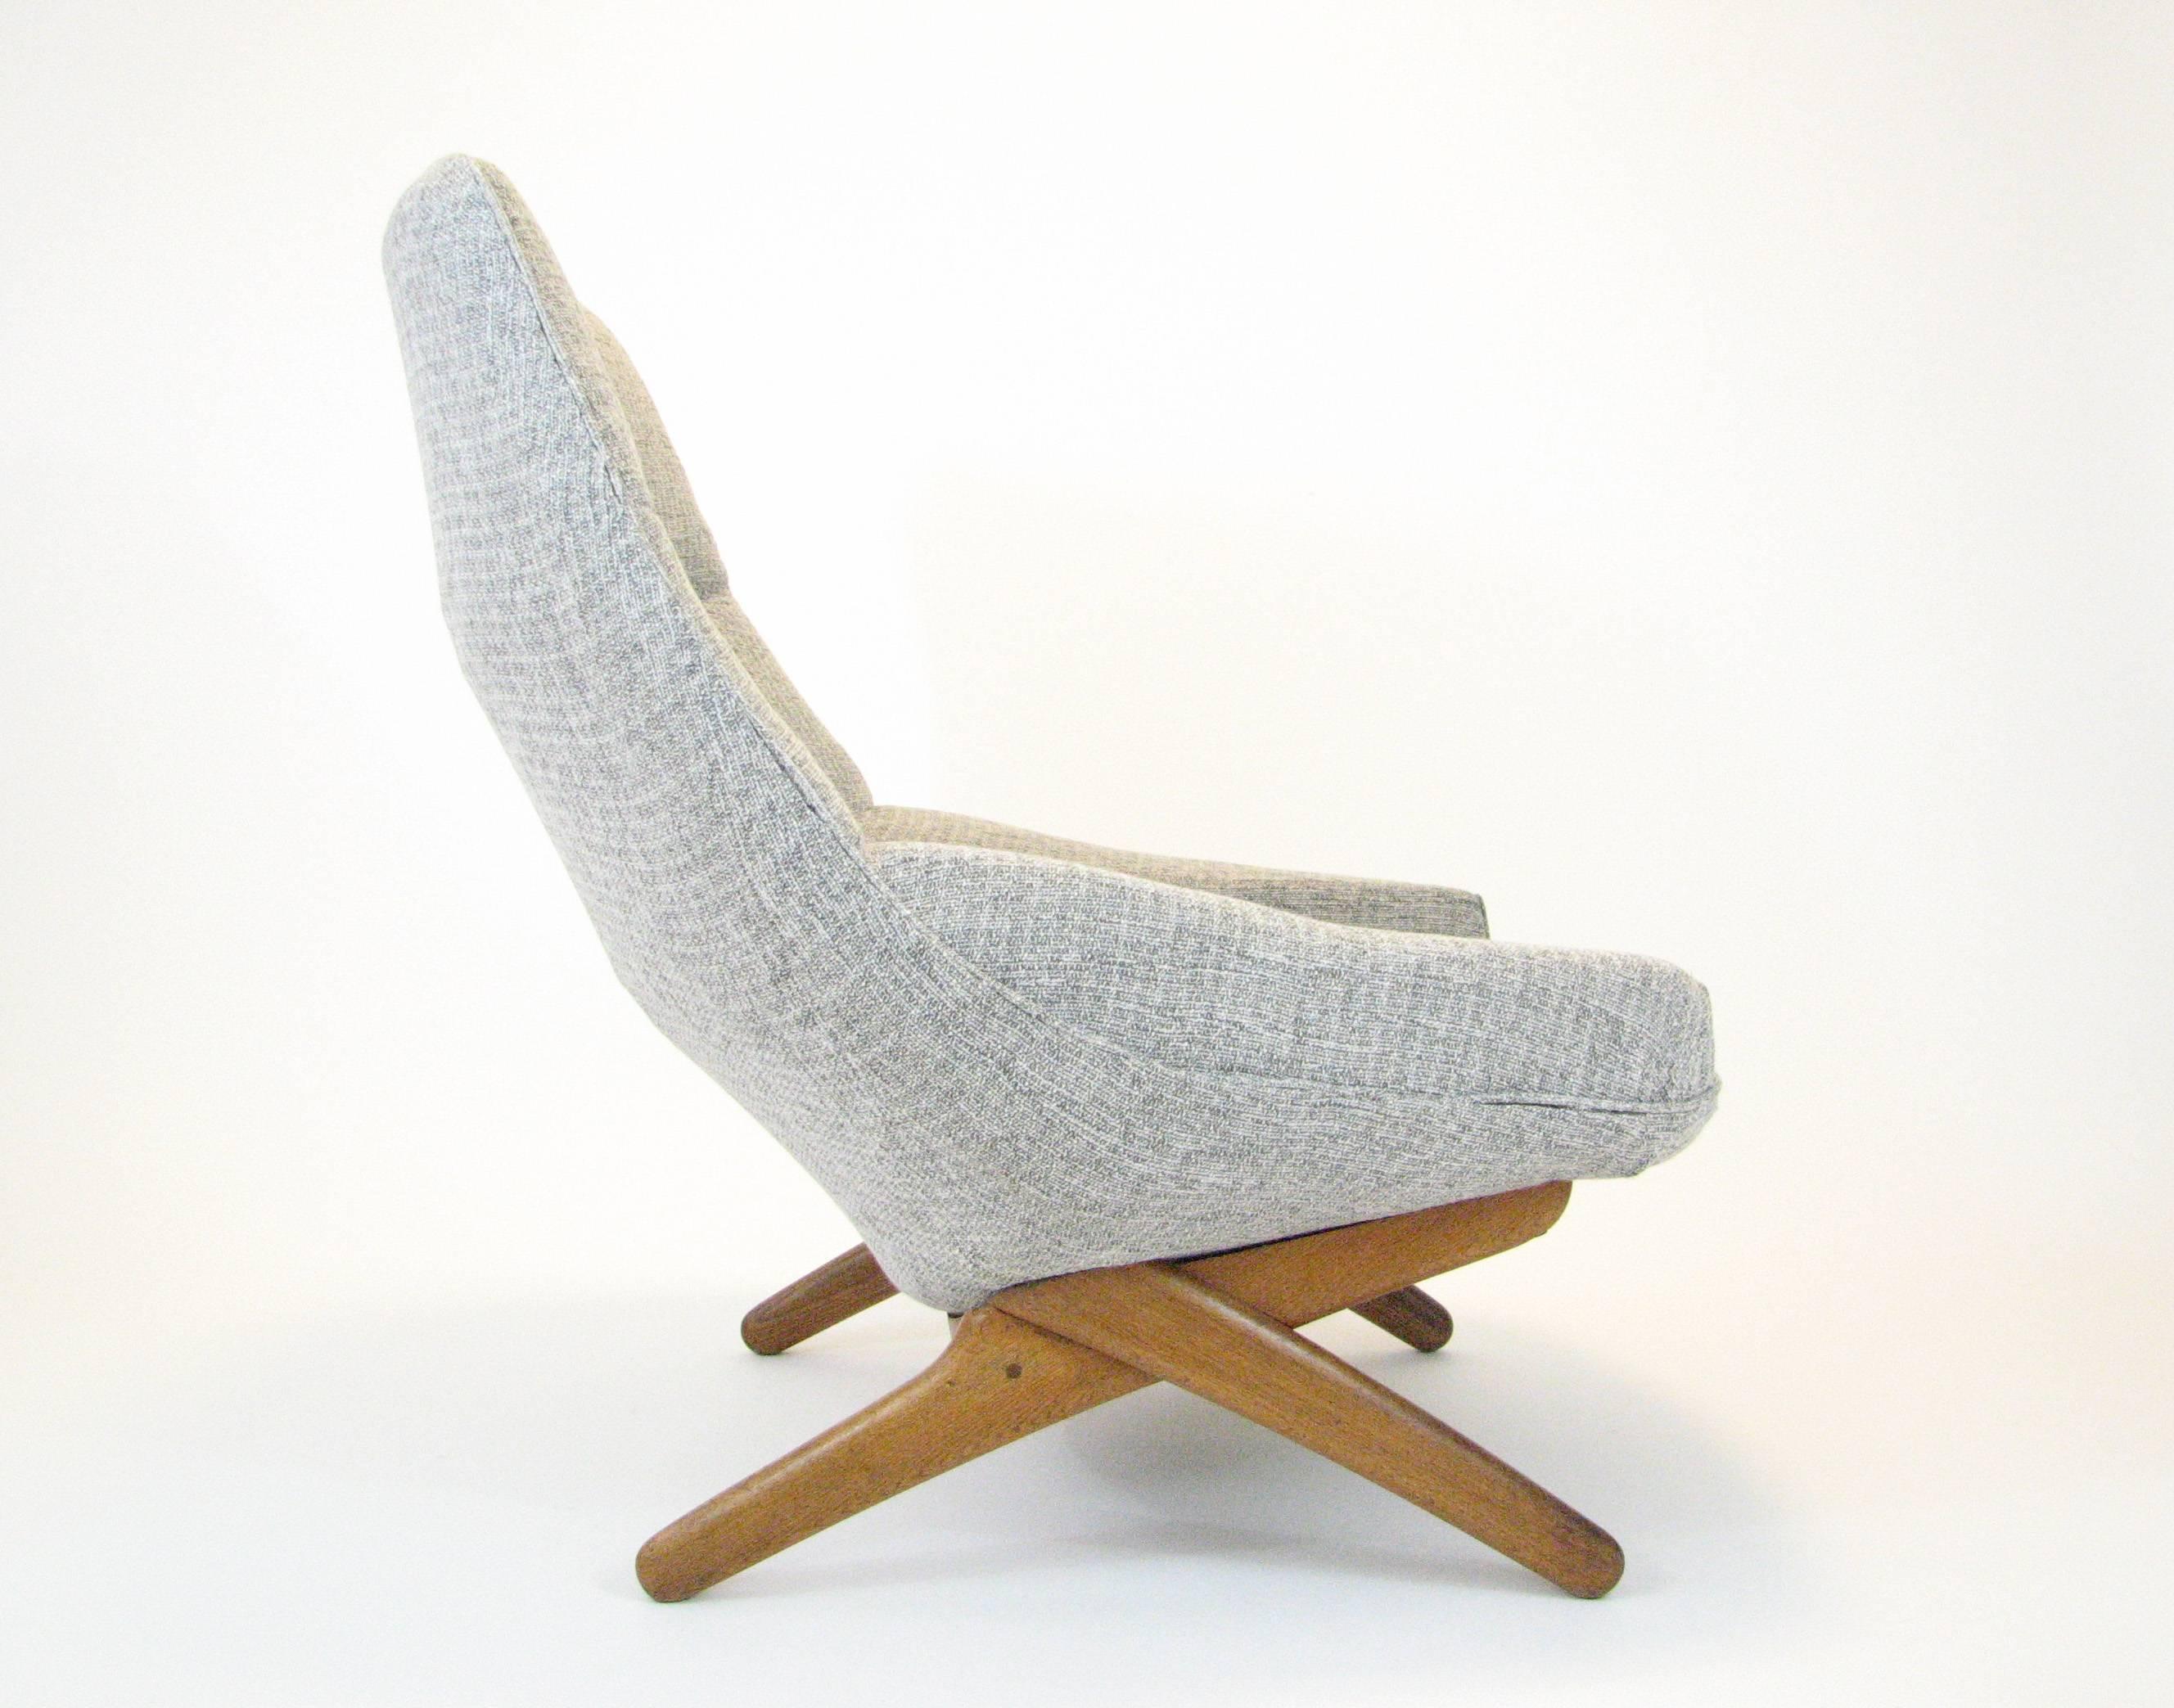 This ML 91 model lounge chair was designed by Illum Wikkelsø and manufactured by Mikael Laursen in Denmark in the 1960s. Teak frame. Reupholstered in 2017 in grey fabric. 

Overall good, vintage condition and structurally sound. A repair has been